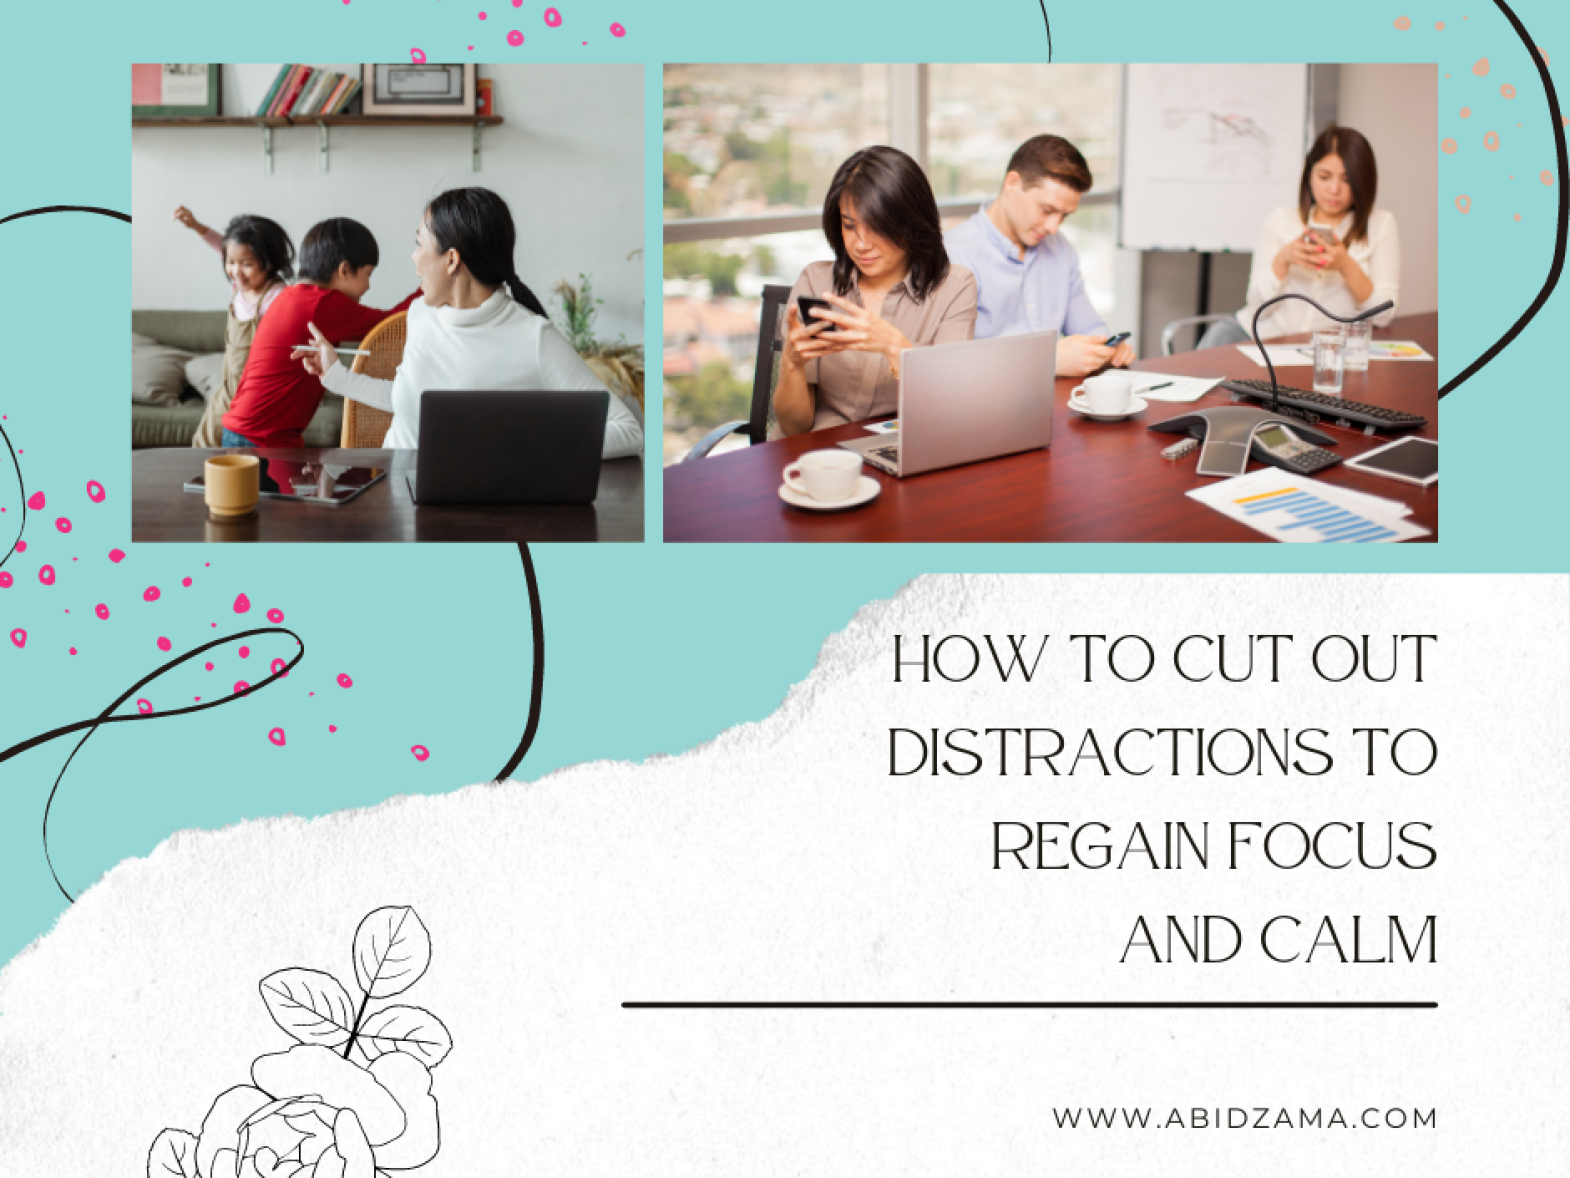 How to Cut Out Distractions to Regain Focus and Calm